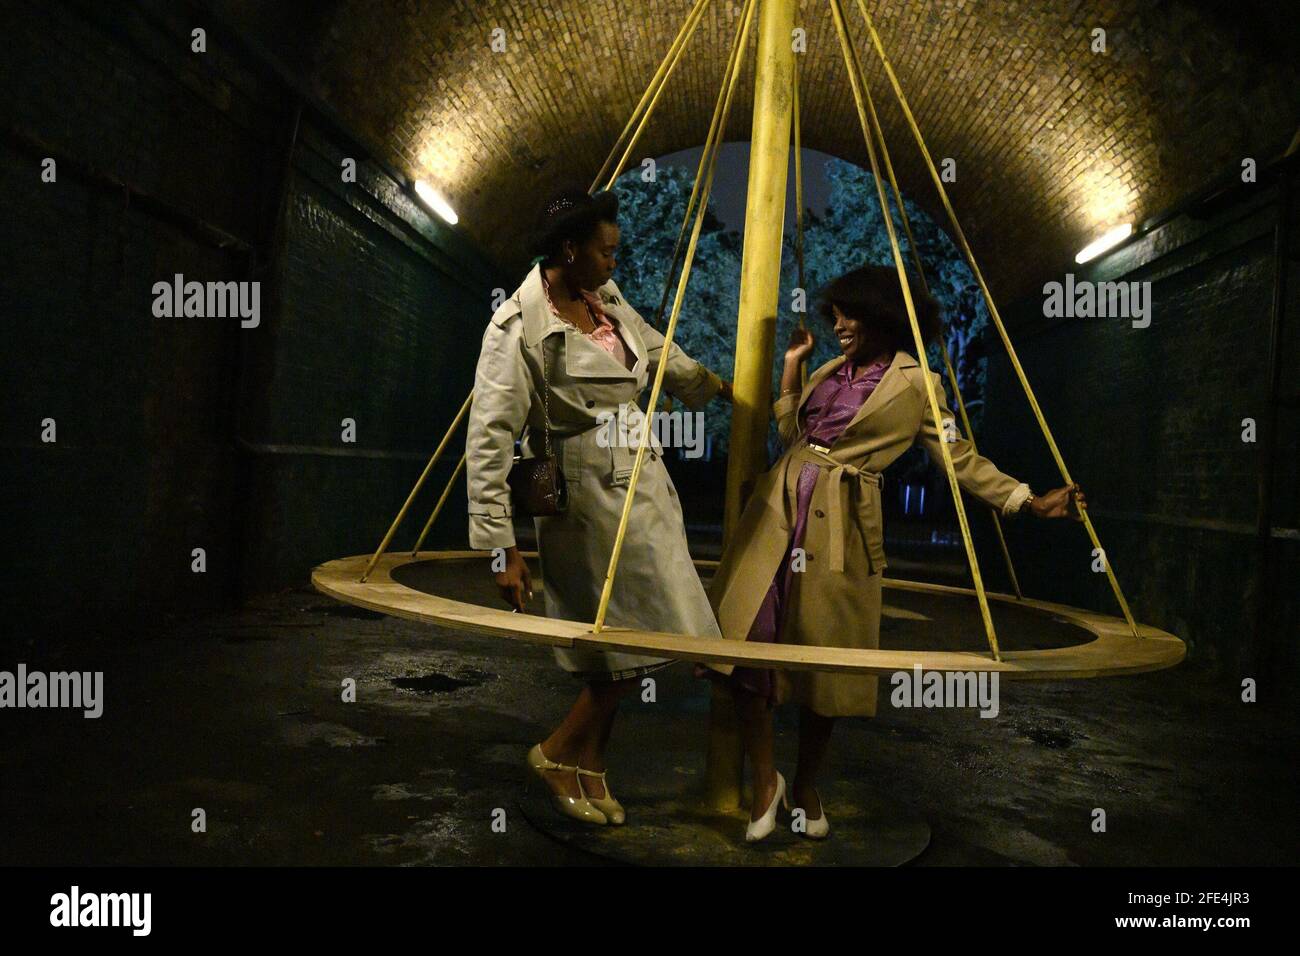 SHANIQUA OKWOK and AMARAH-JAE ST. AUBYN in LOVERS ROCK (2020) -Original title: SMALL AXE LOVERS ROCK-, directed by STEVE MCQUEEN. Credit: BBC FILMS / Album Stock Photo